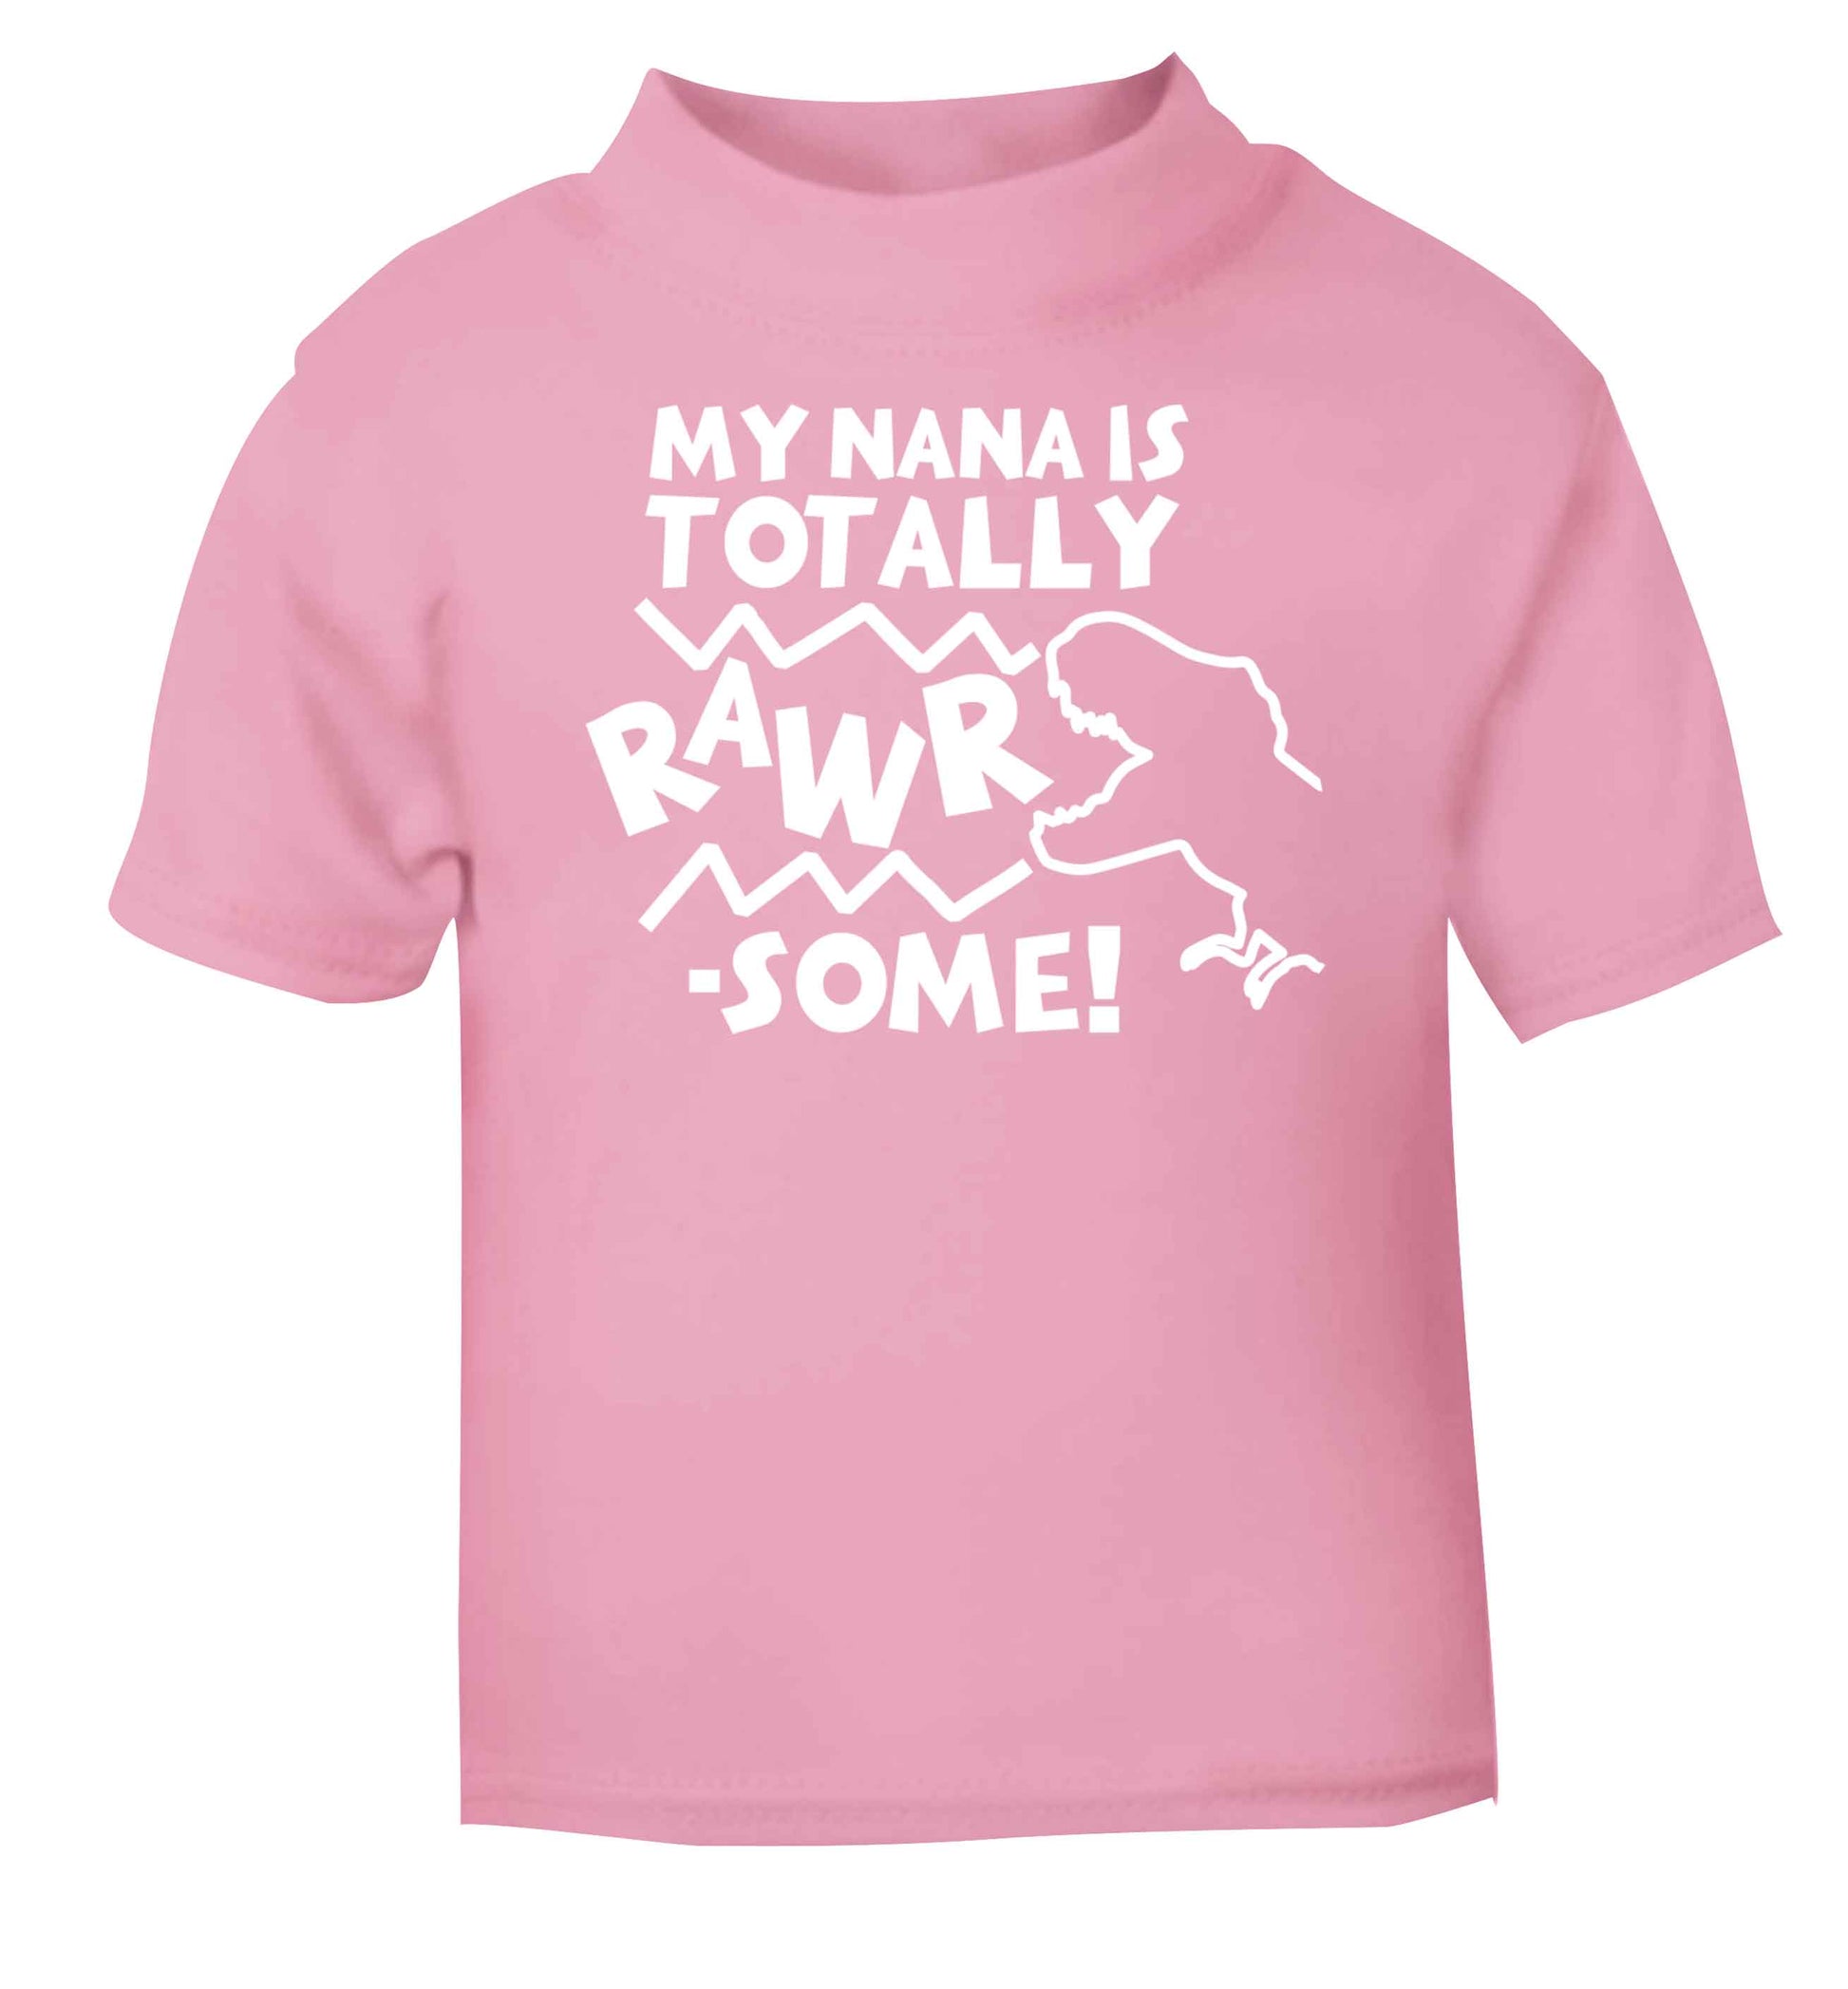 My nana is totally rawrsome light pink baby toddler Tshirt 2 Years